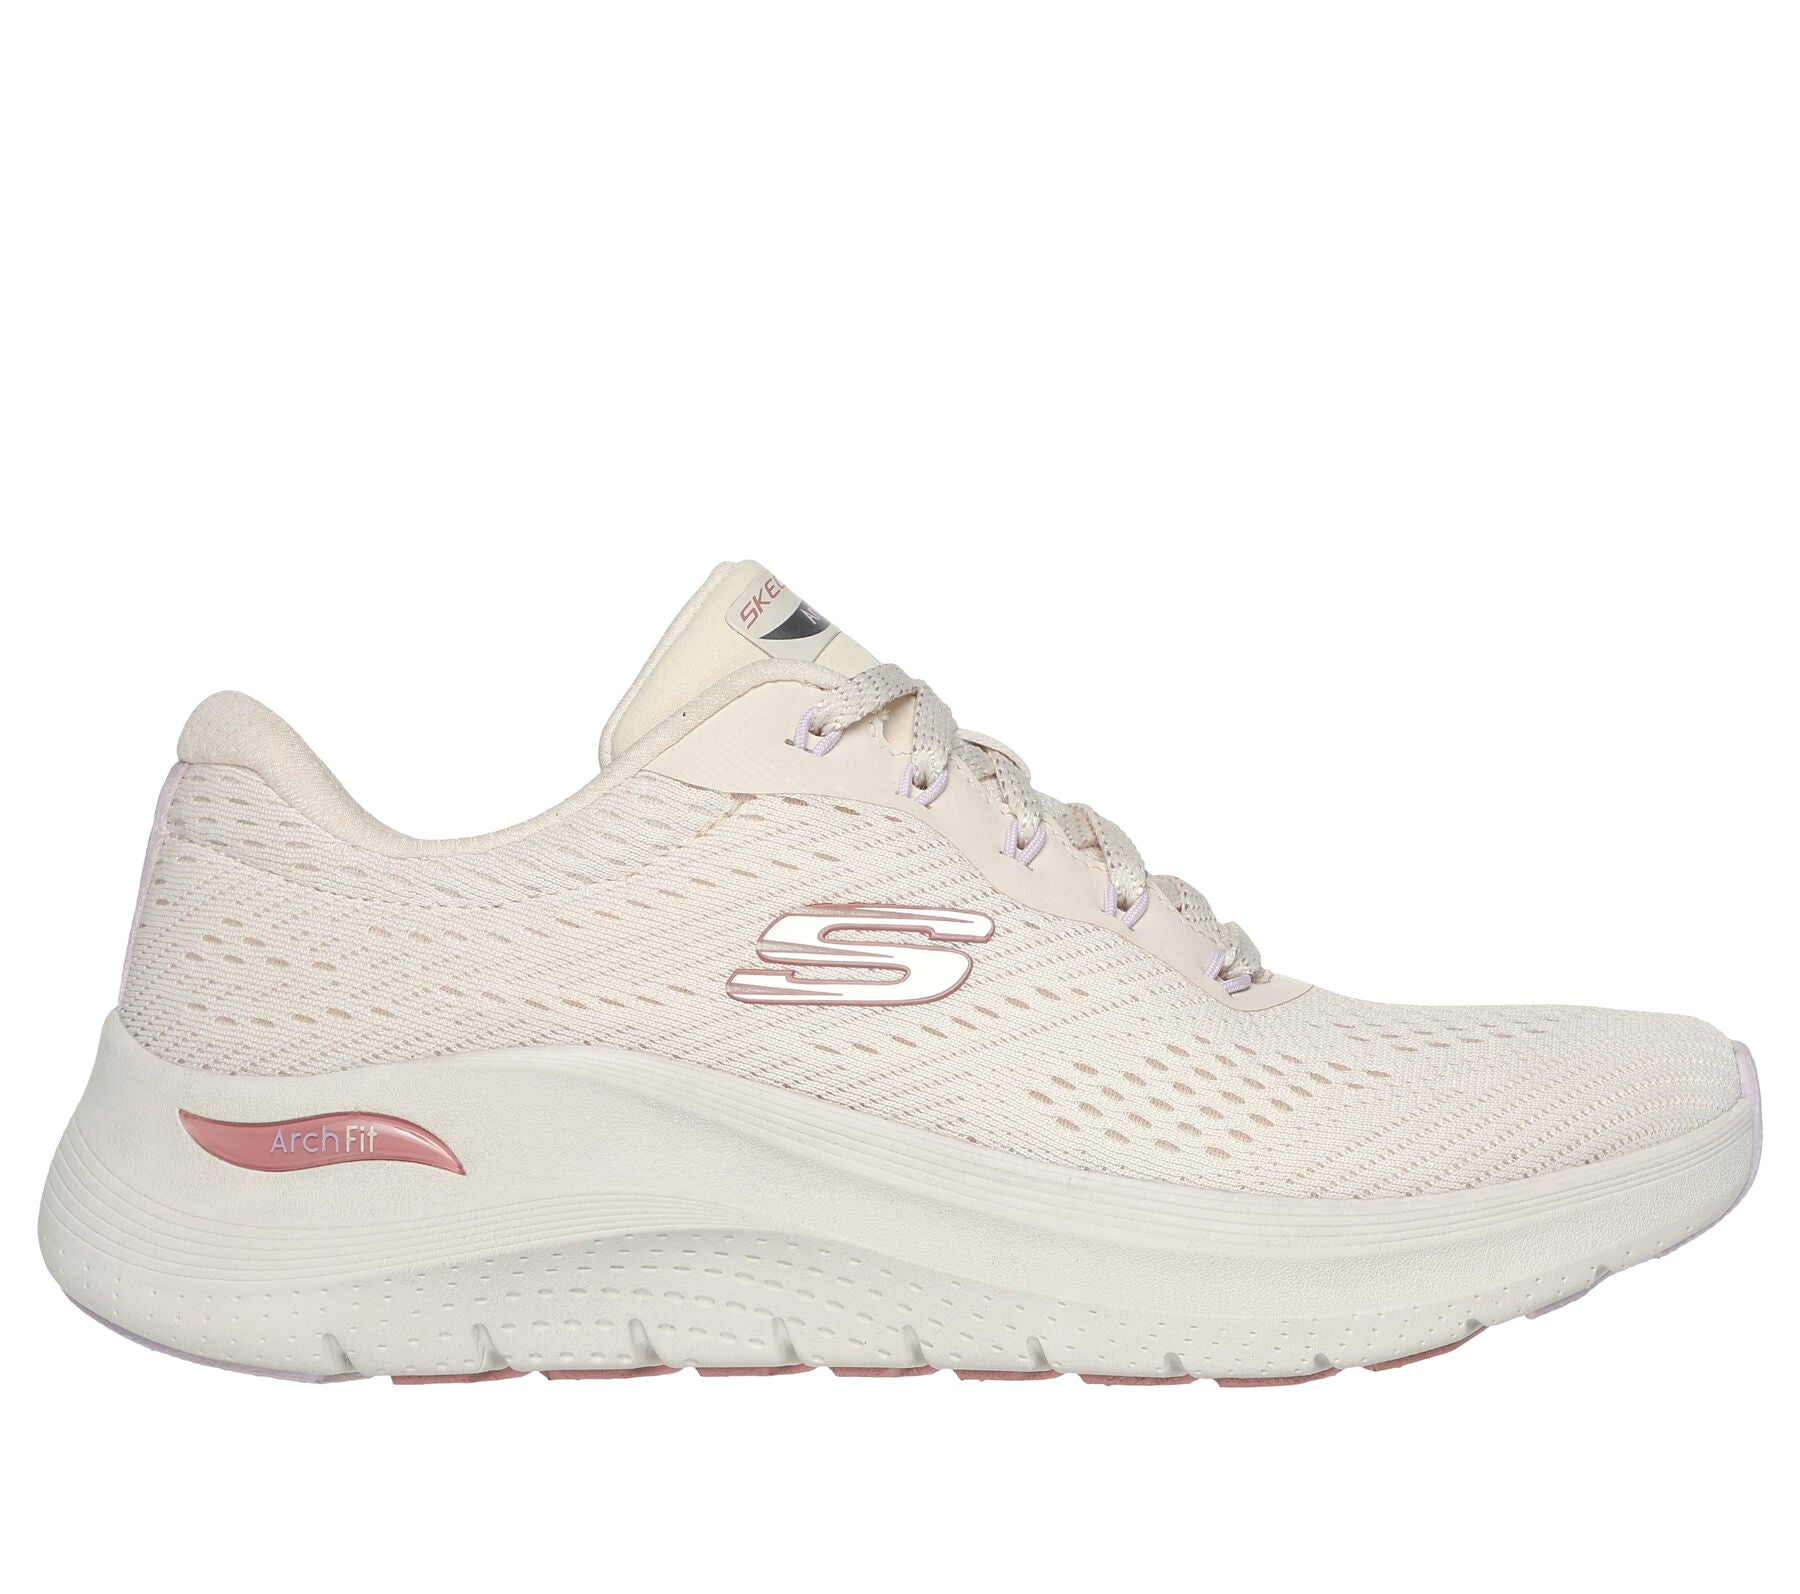 Skechers Arch Fit® 2.0 - Big League: Men's Supportive Sneakers